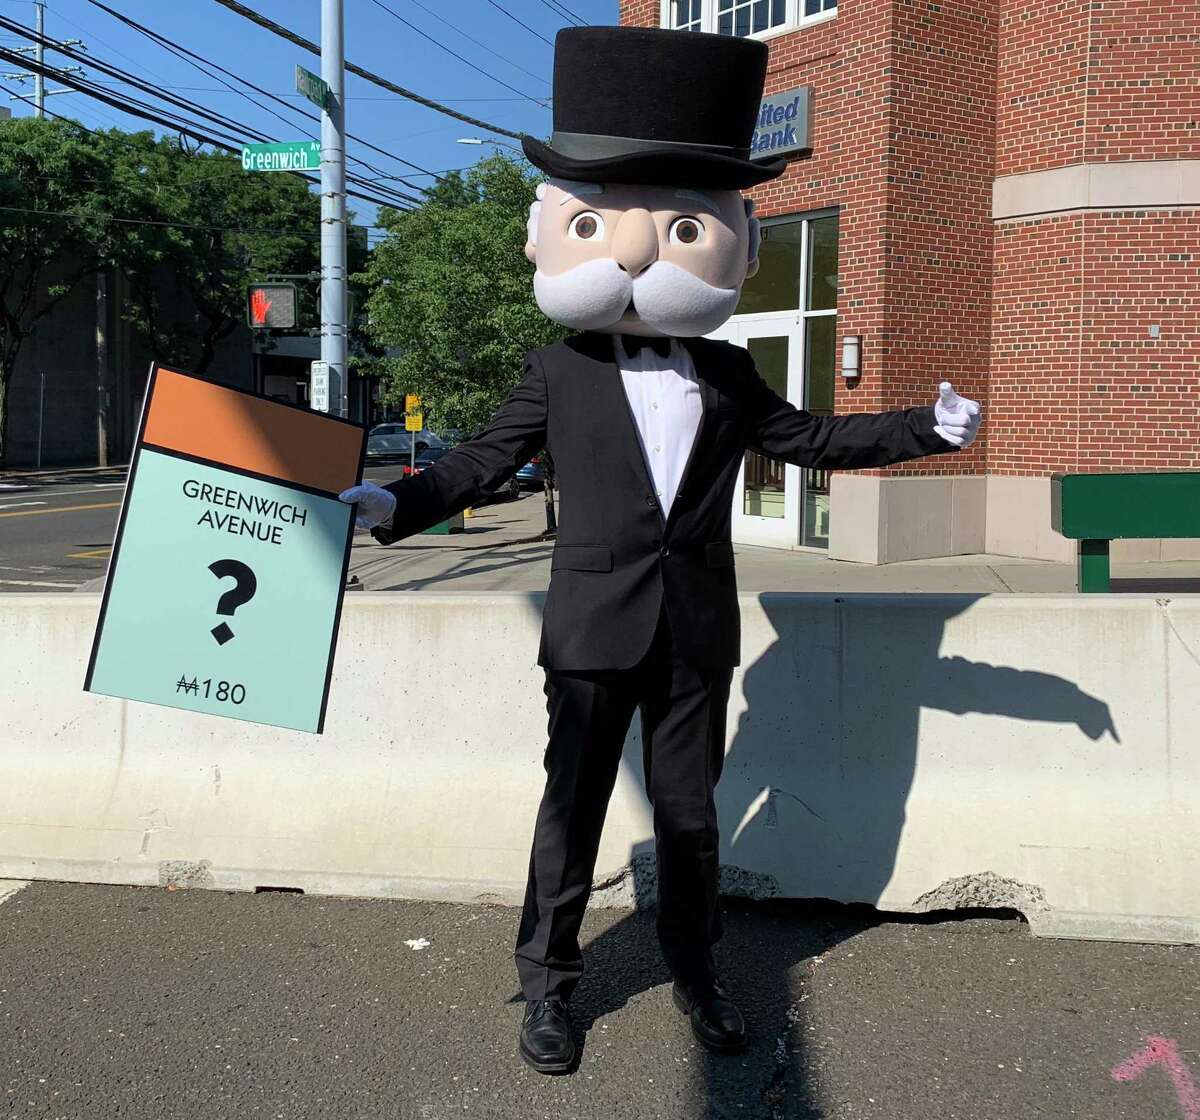 Mr. Monopoly did a little tour of town over the summer to raise awareness for the new Greenwich version of Monopoly that is now avalable in stores in town.